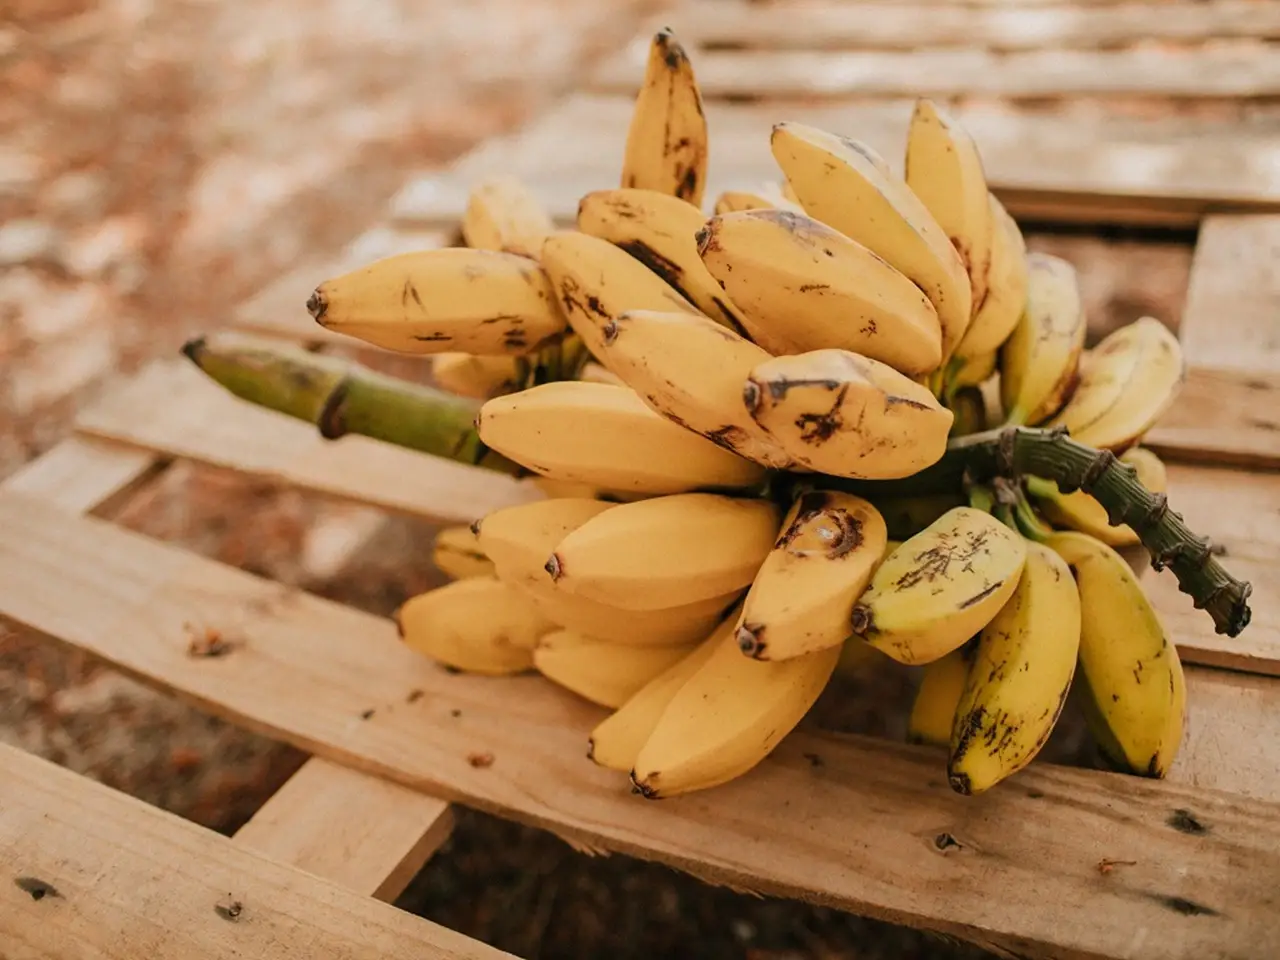 One banana contains around 112 calories and contains almost every essential mineral and vitamin needed by our body.